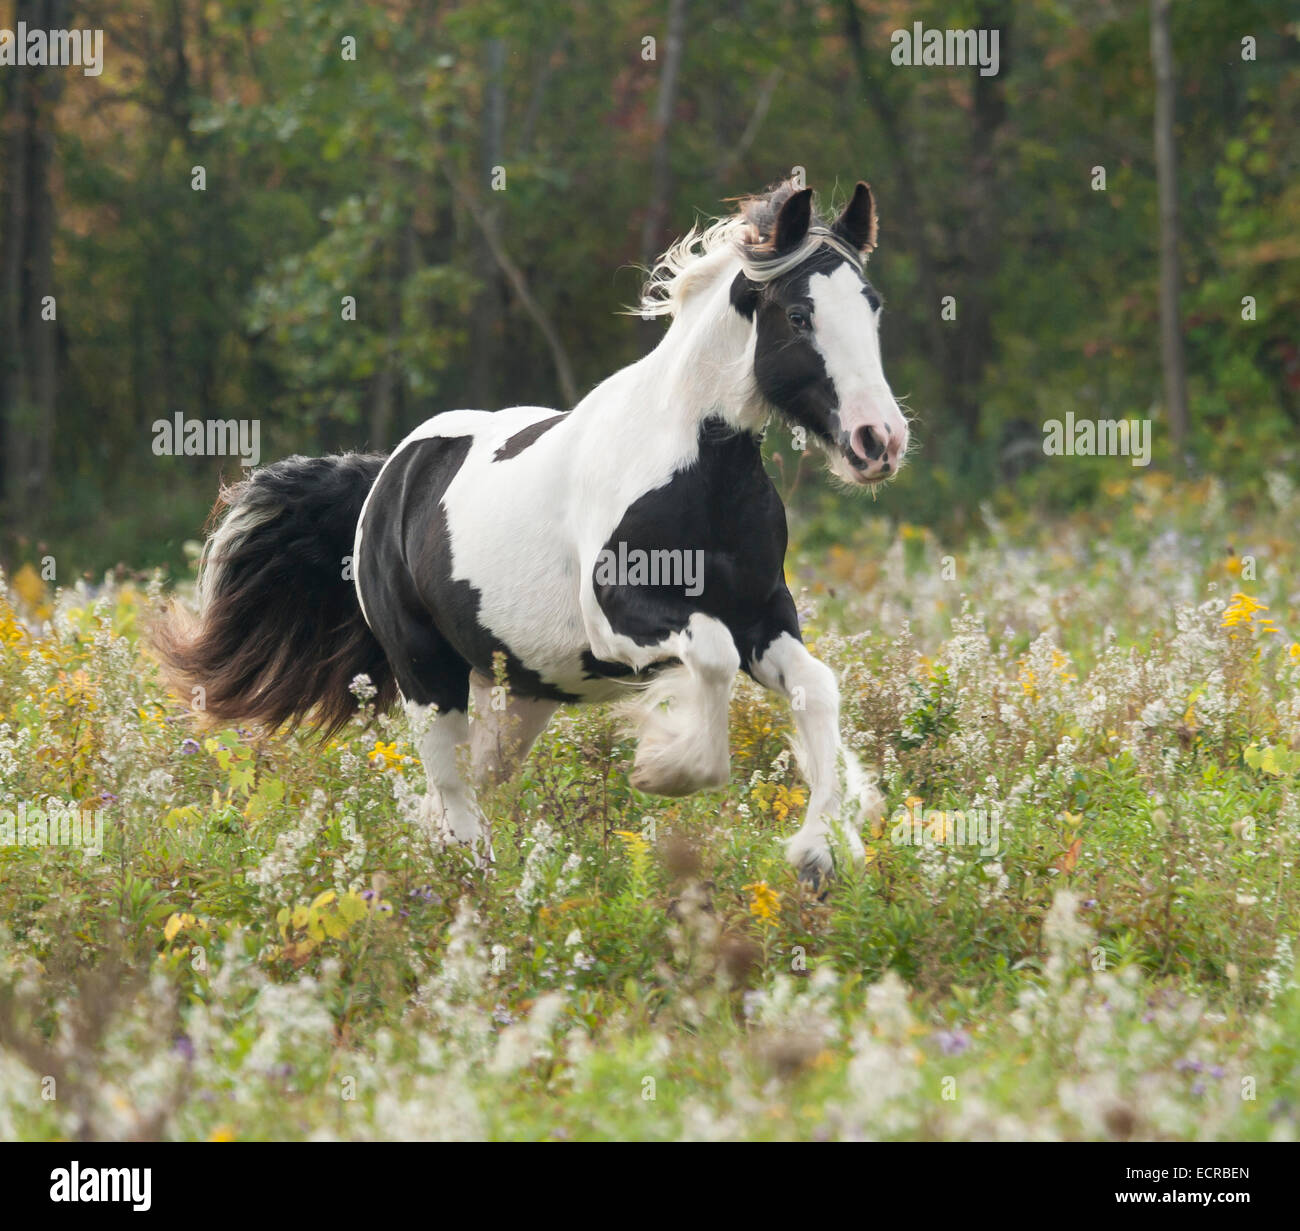 Gypsy Vanner Horse filly running in wildflower meadow Stock Photo